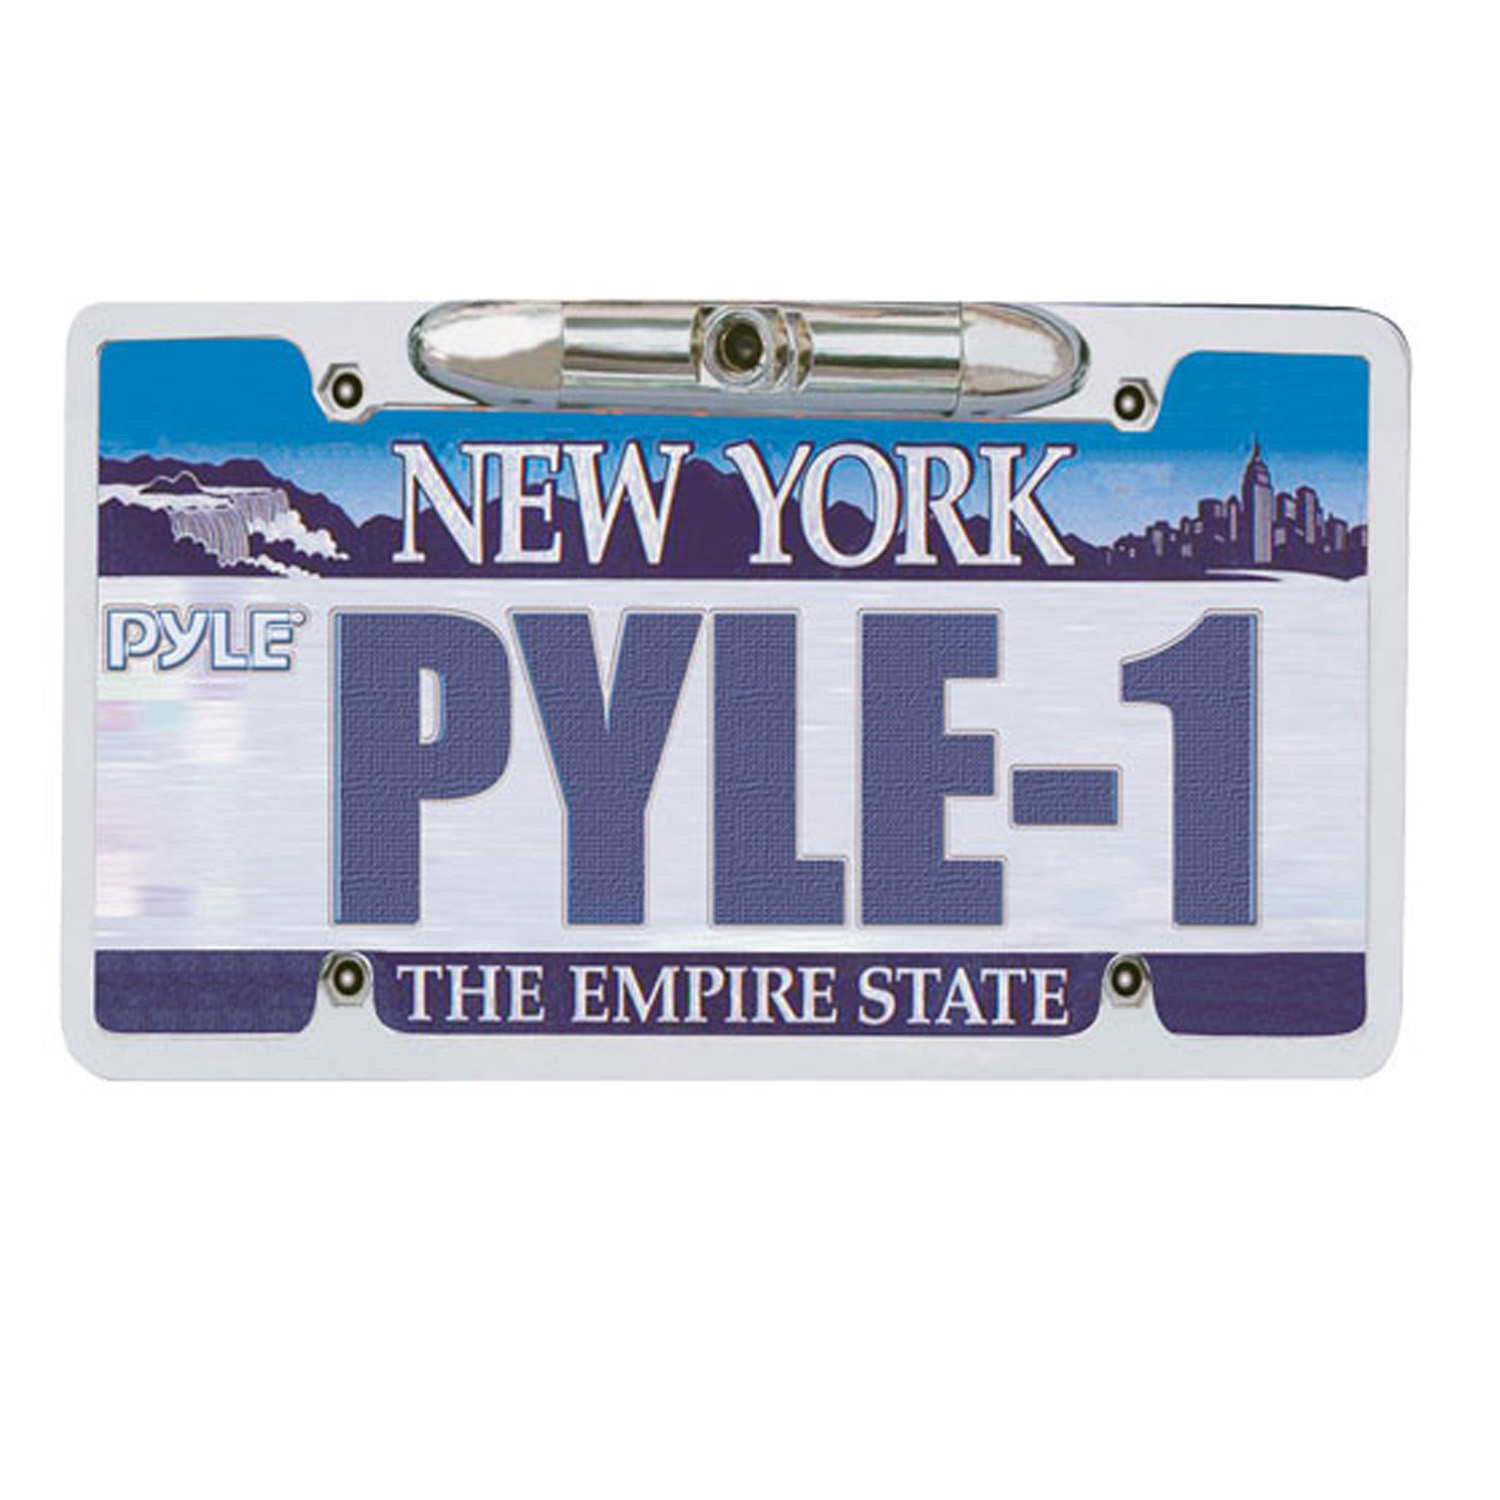 Pyle License Plate Rear View Camera - image 1 of 2